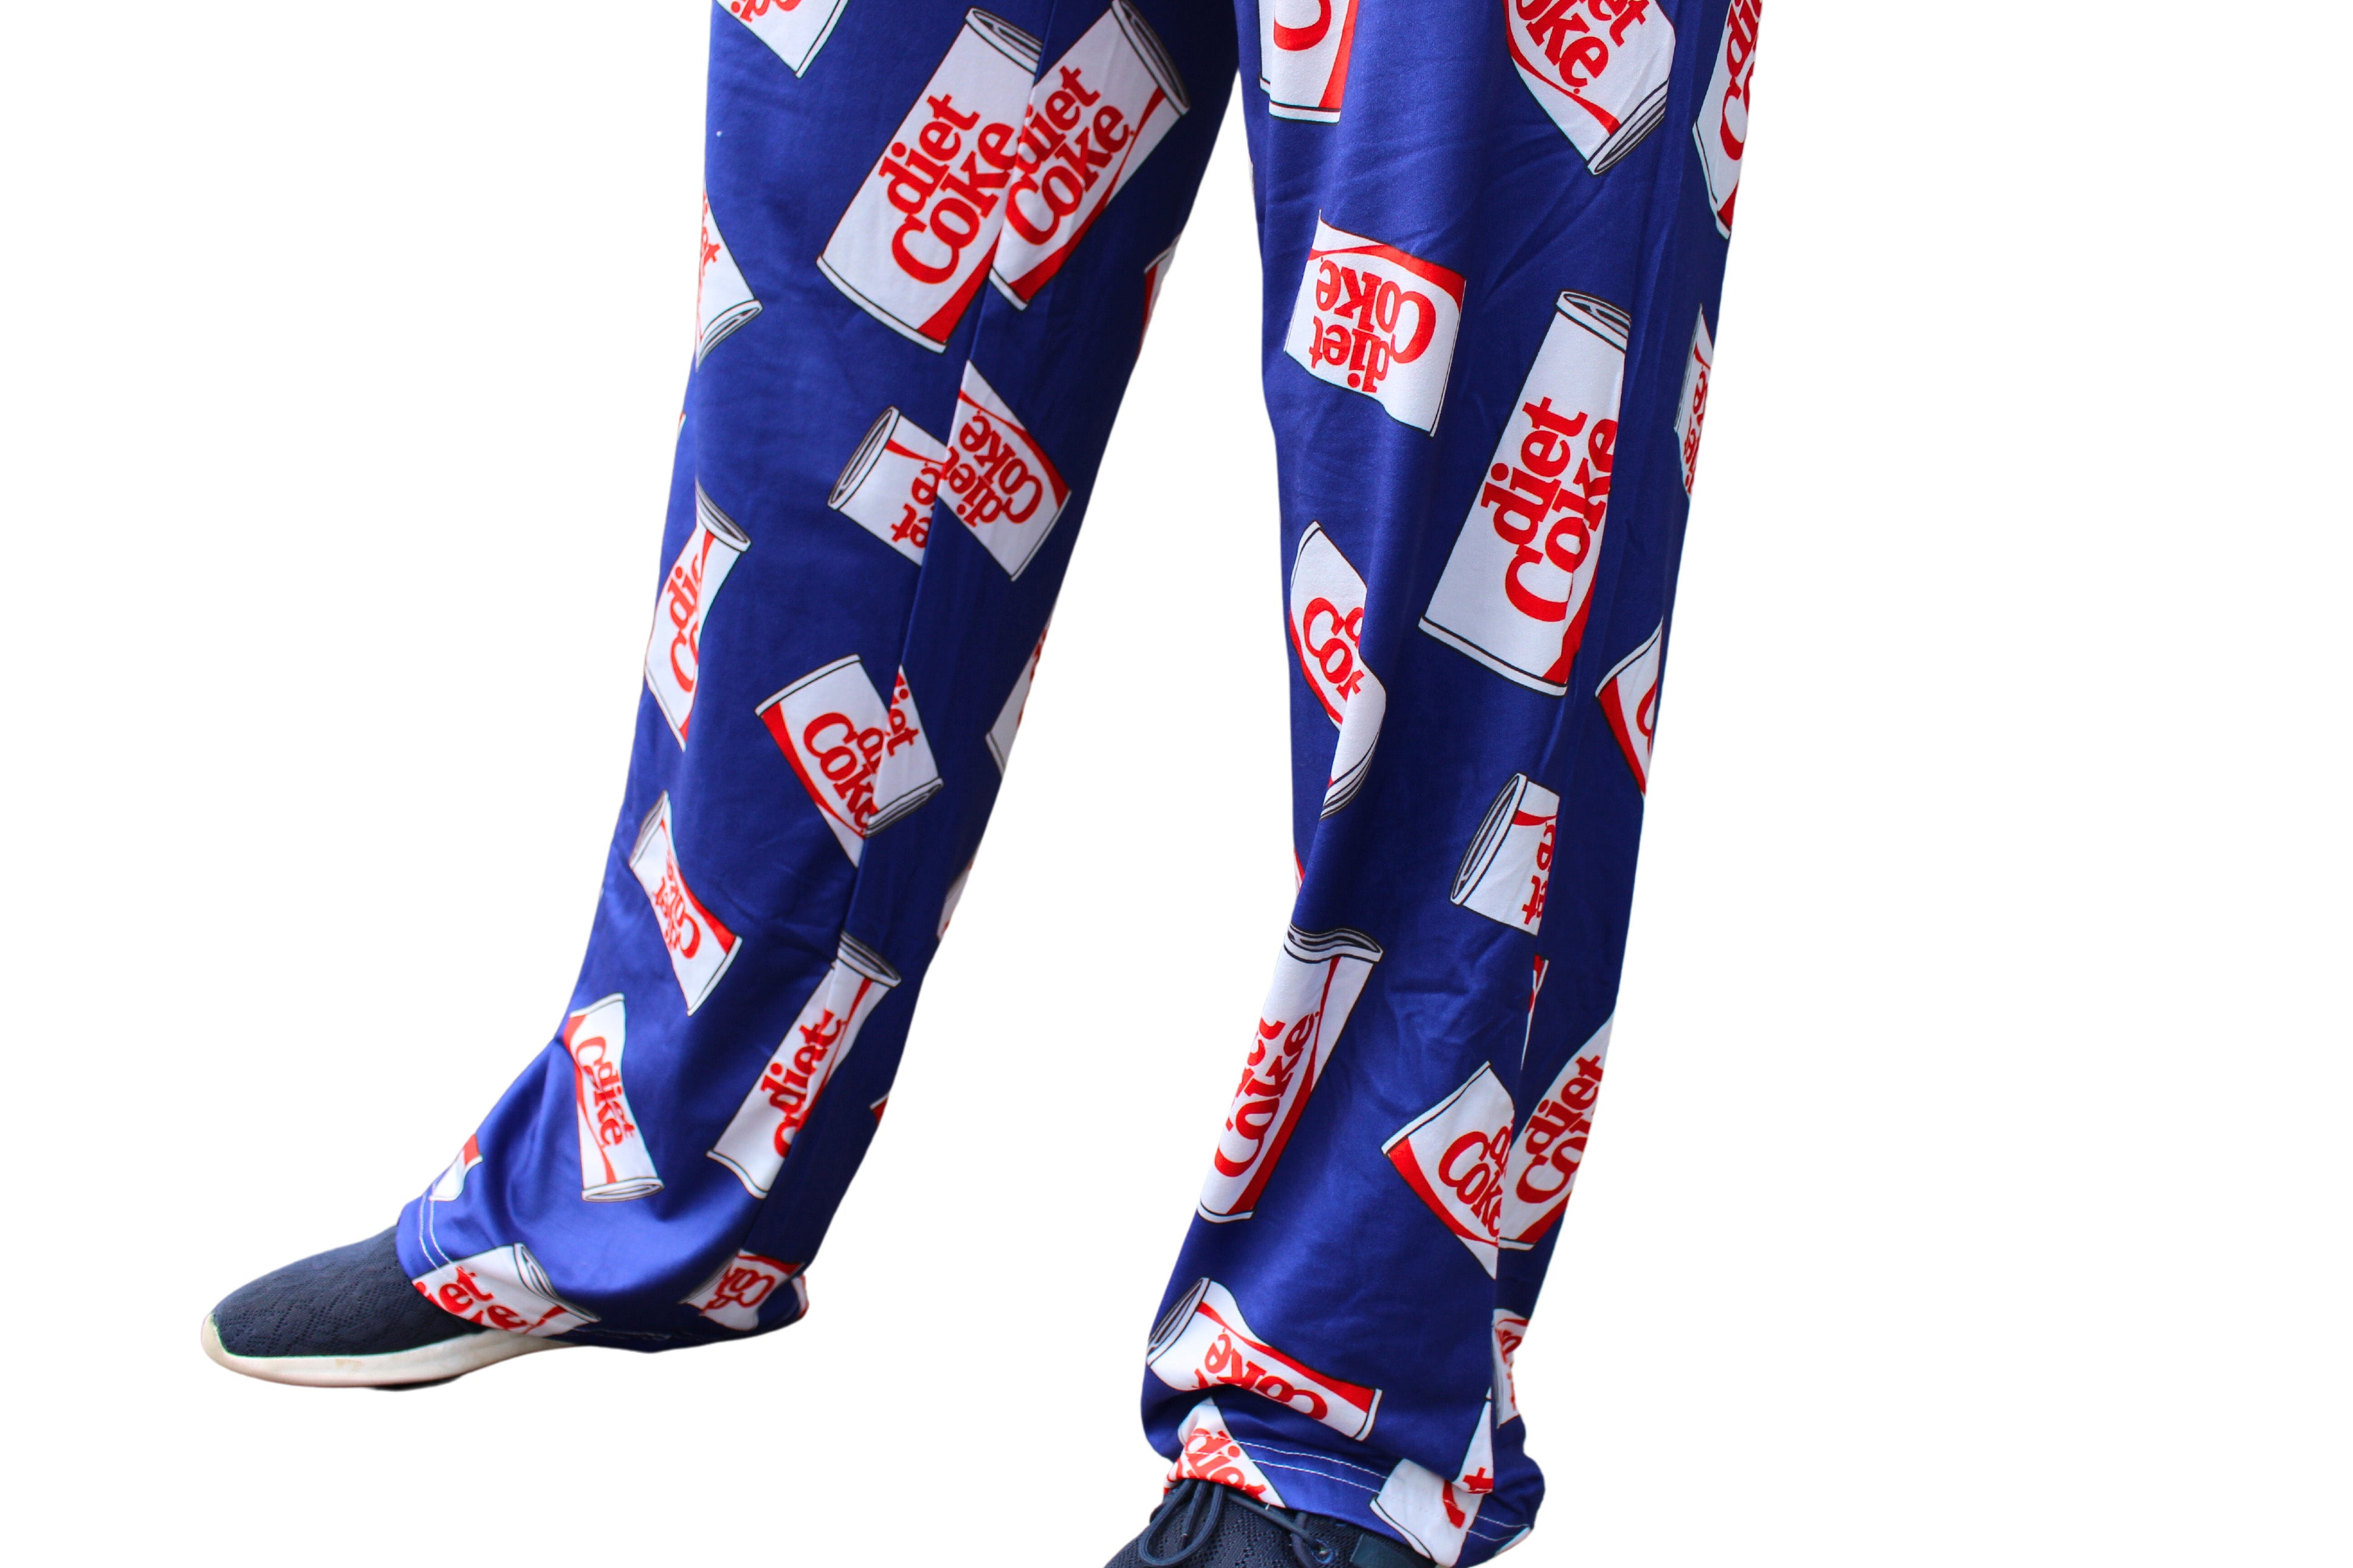 Diet Coke Pajama Lounge Pants on model close up view of bottom of pants